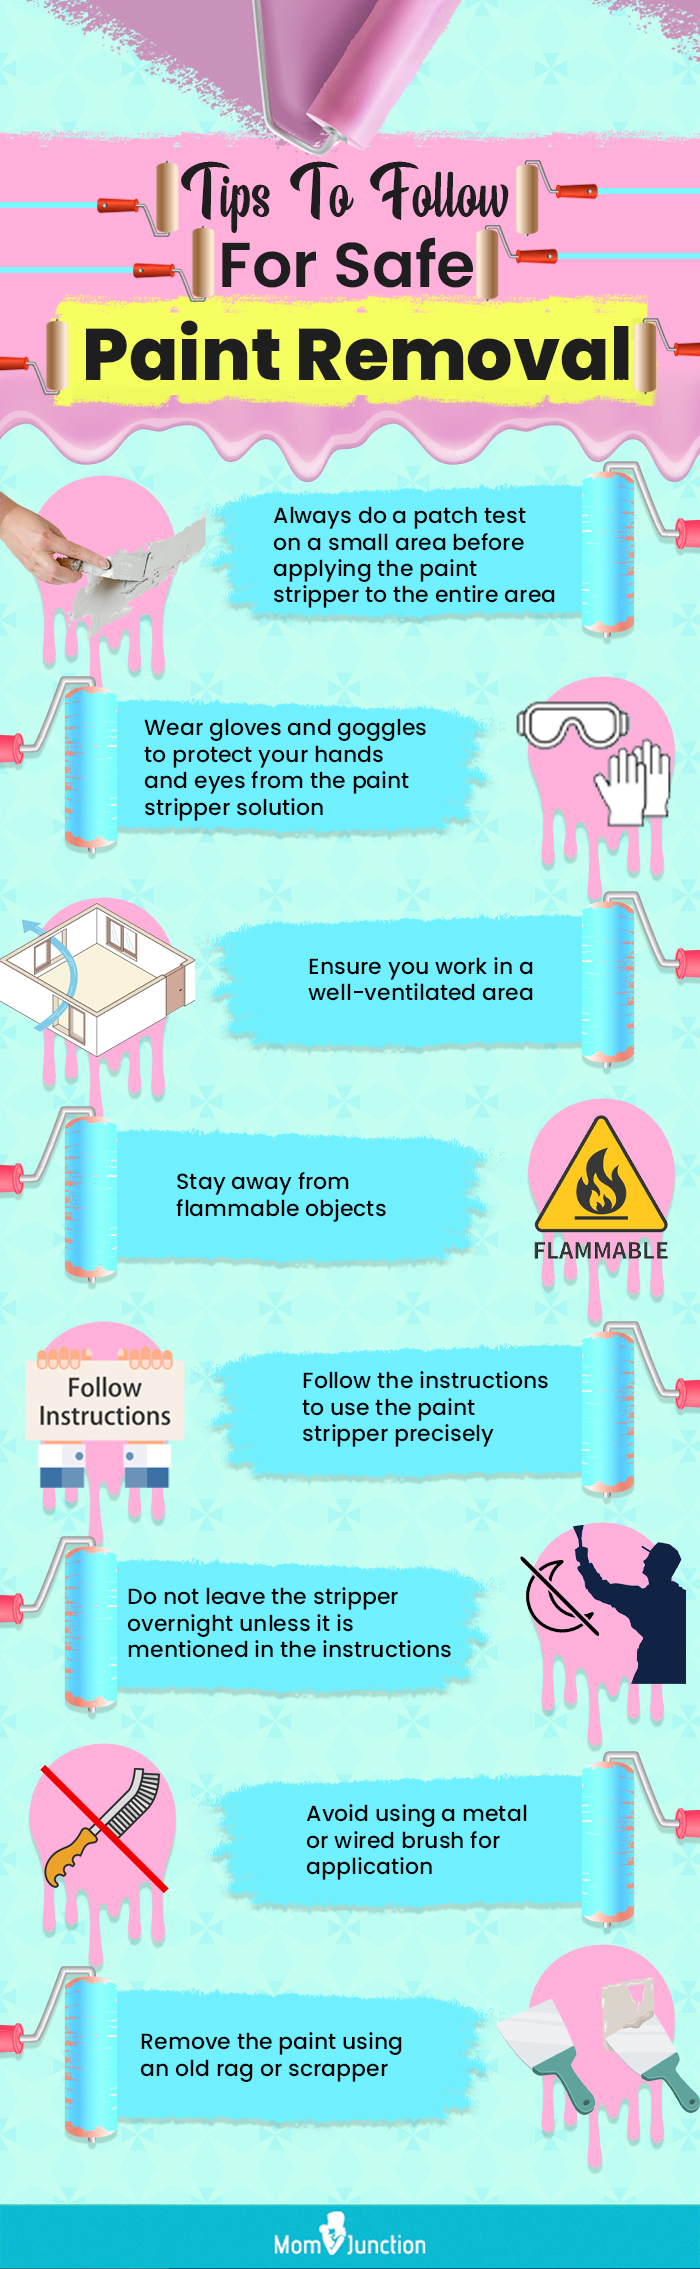 Tips To Follow For Safe Paint Removal (Infographic)